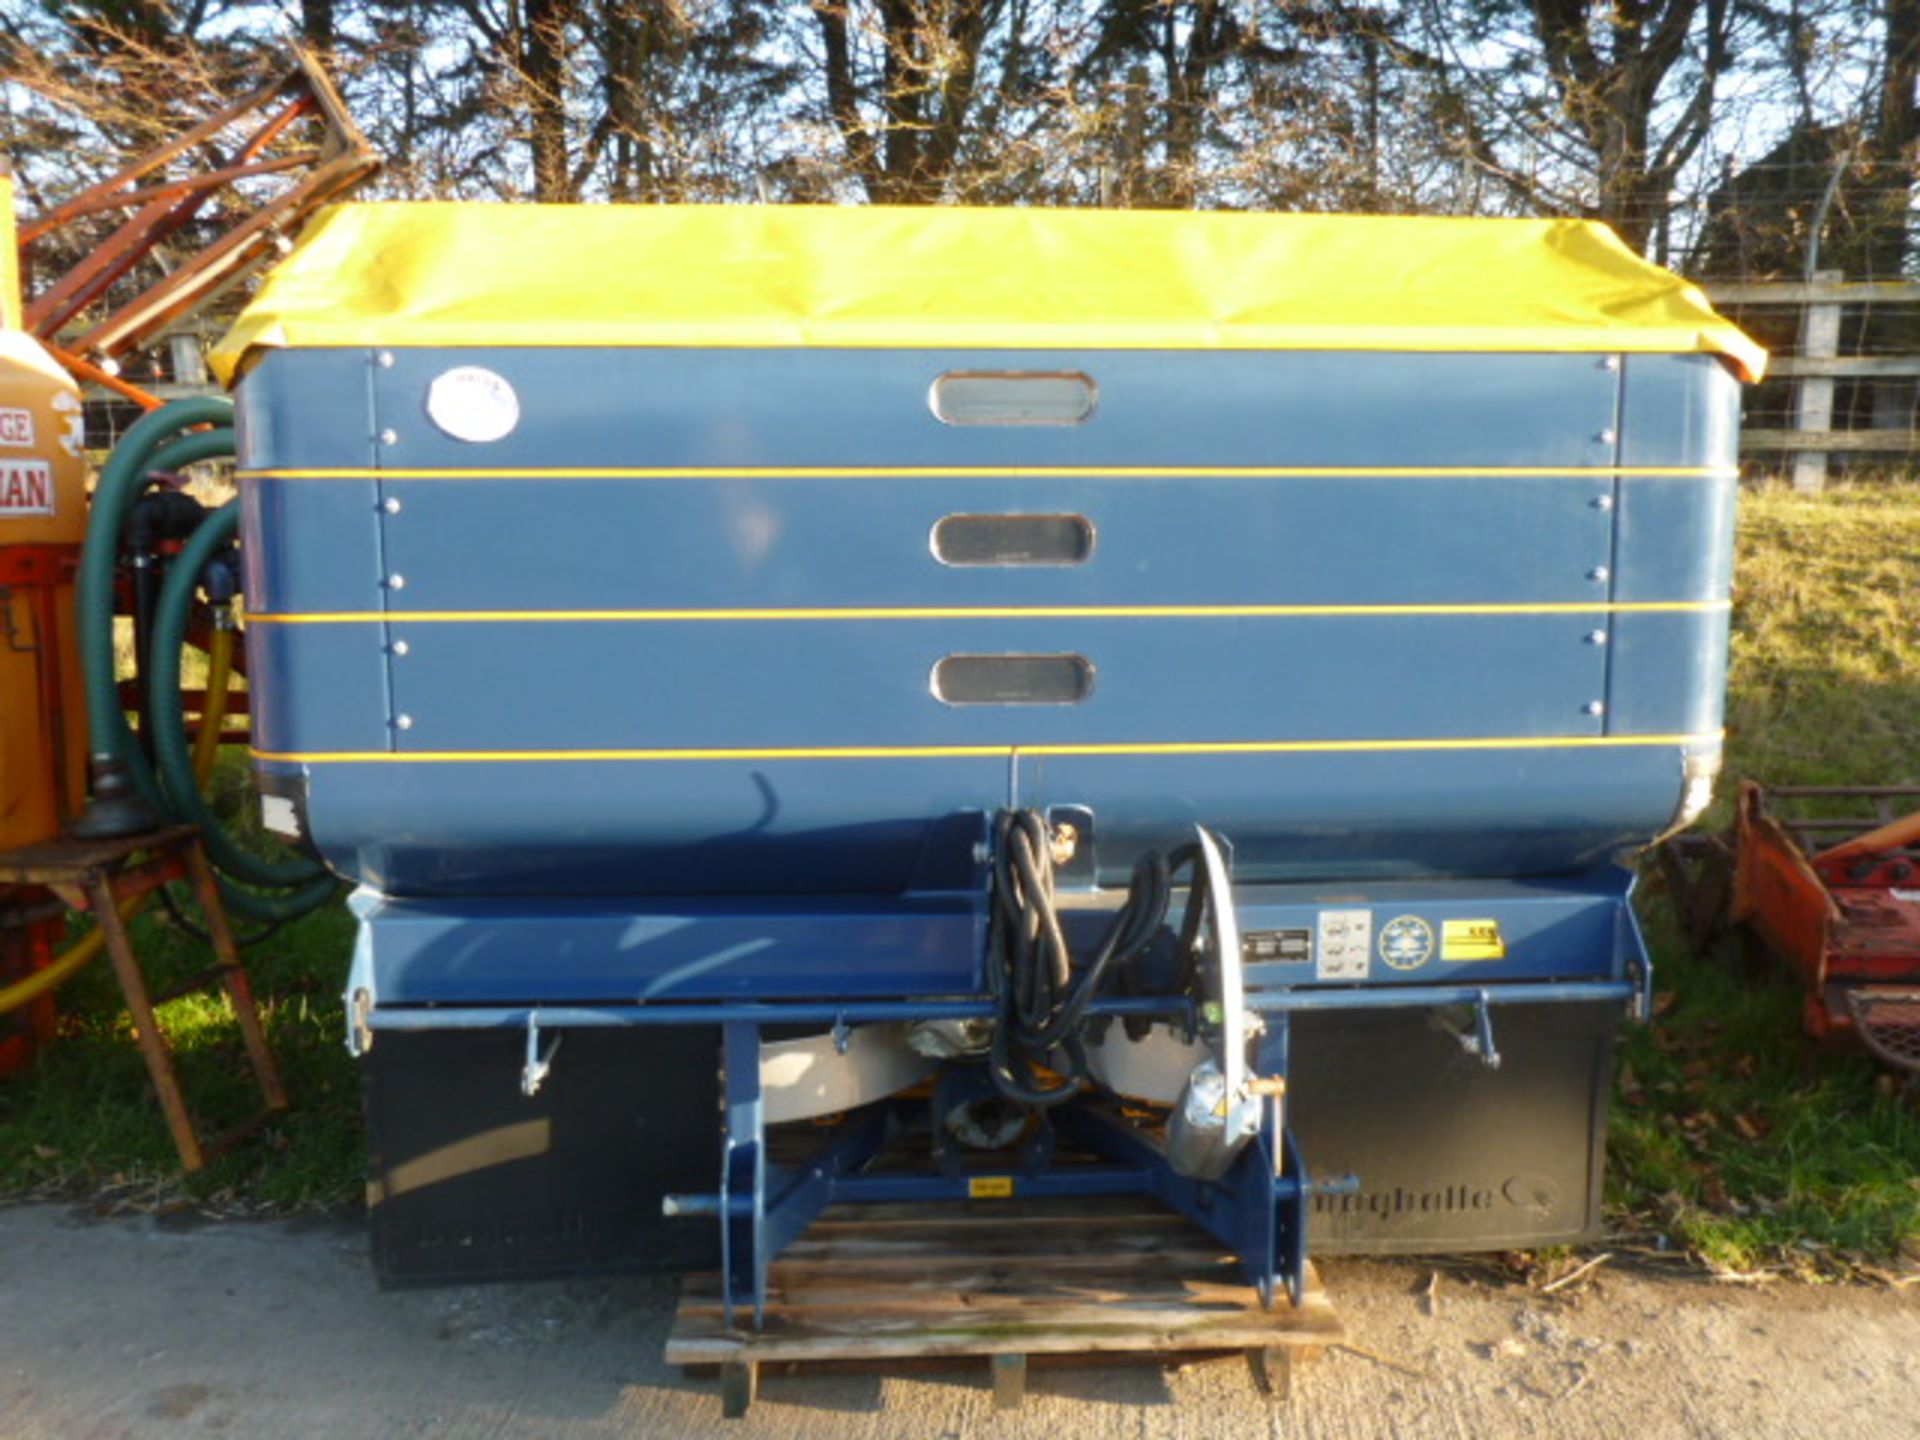 KRM L2 PLUS FERT SPINNER, VARIABLE RATE ELECTRIC CONTROL BOX. 2014 MODEL WITH OPS BOOKS, PTO AND